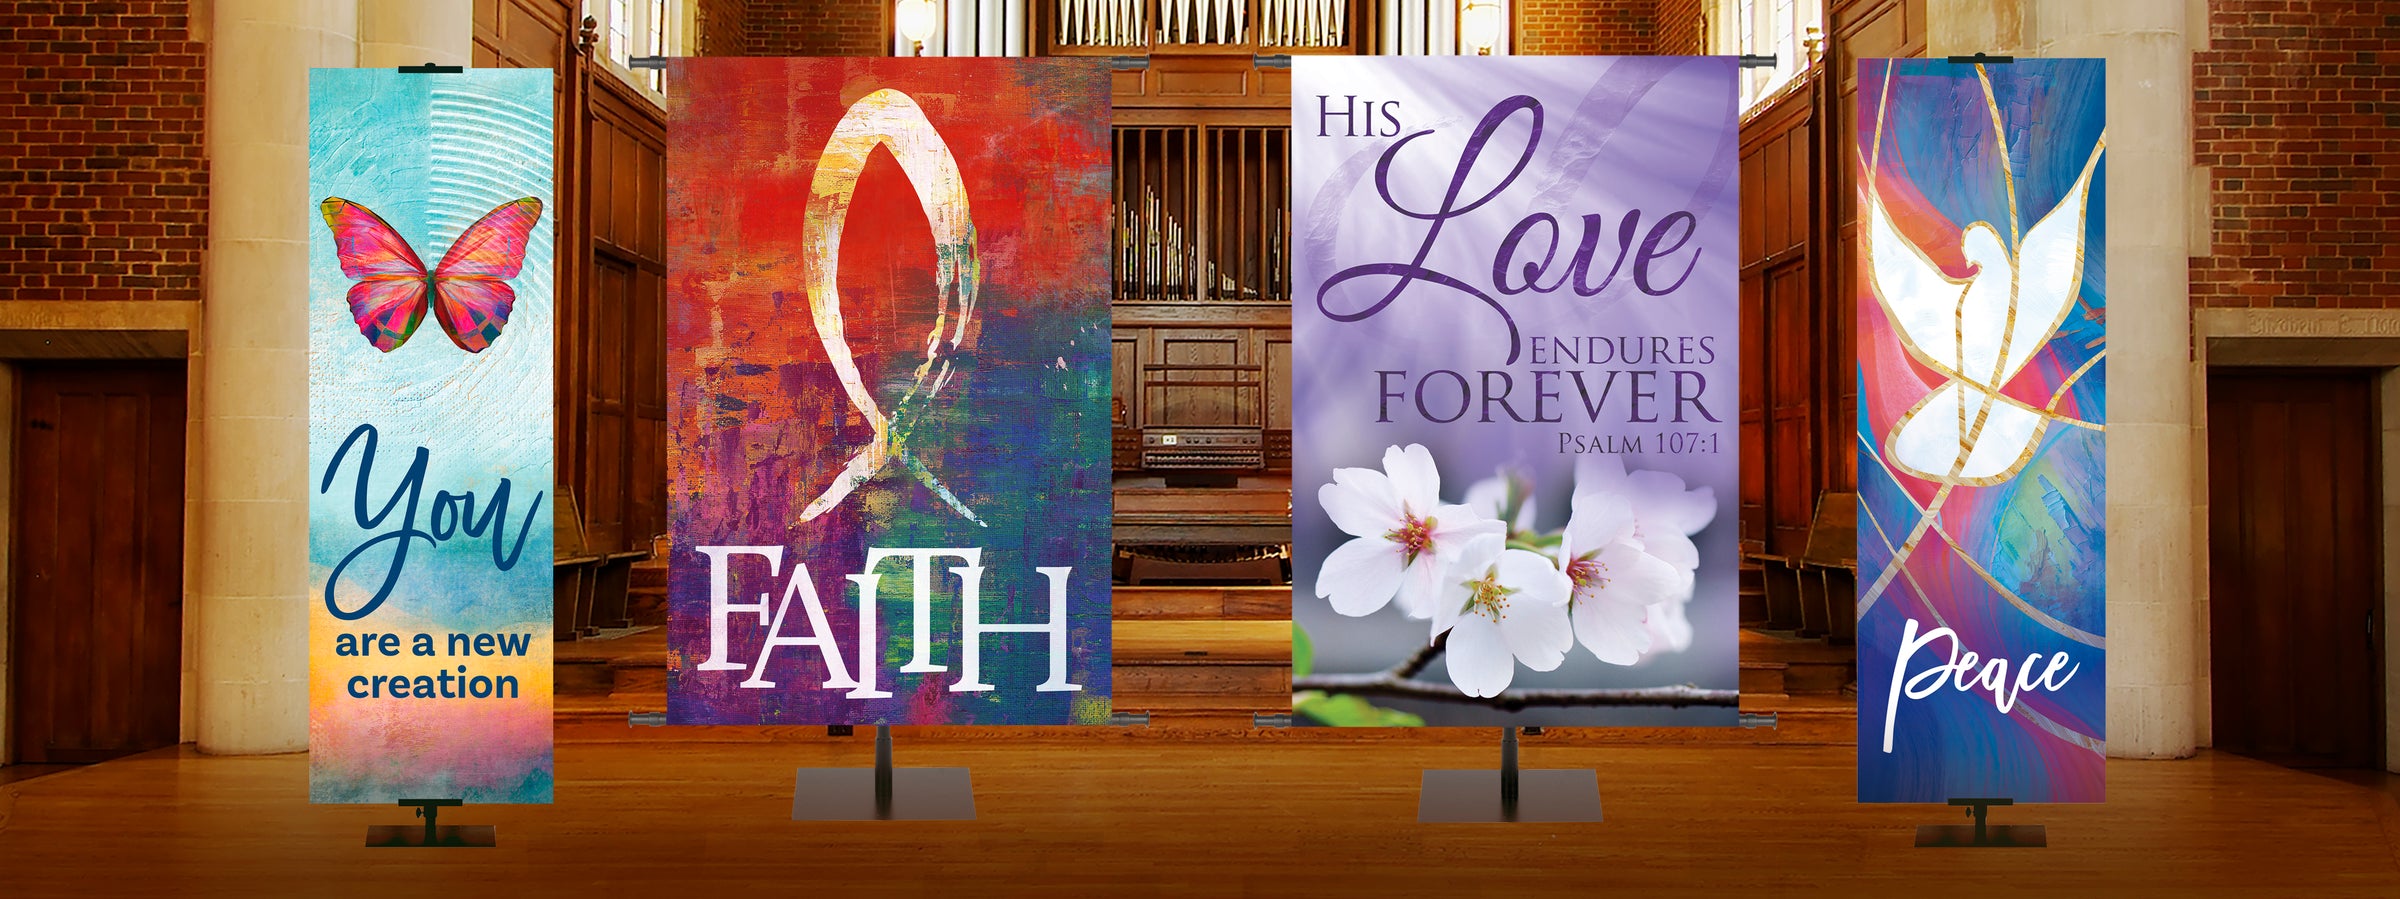 Four banners in church sanctuary in various designs -  New Creation Butterfly, Faith Fish Symbol, His Love Endures on Purple, Peace with white dove